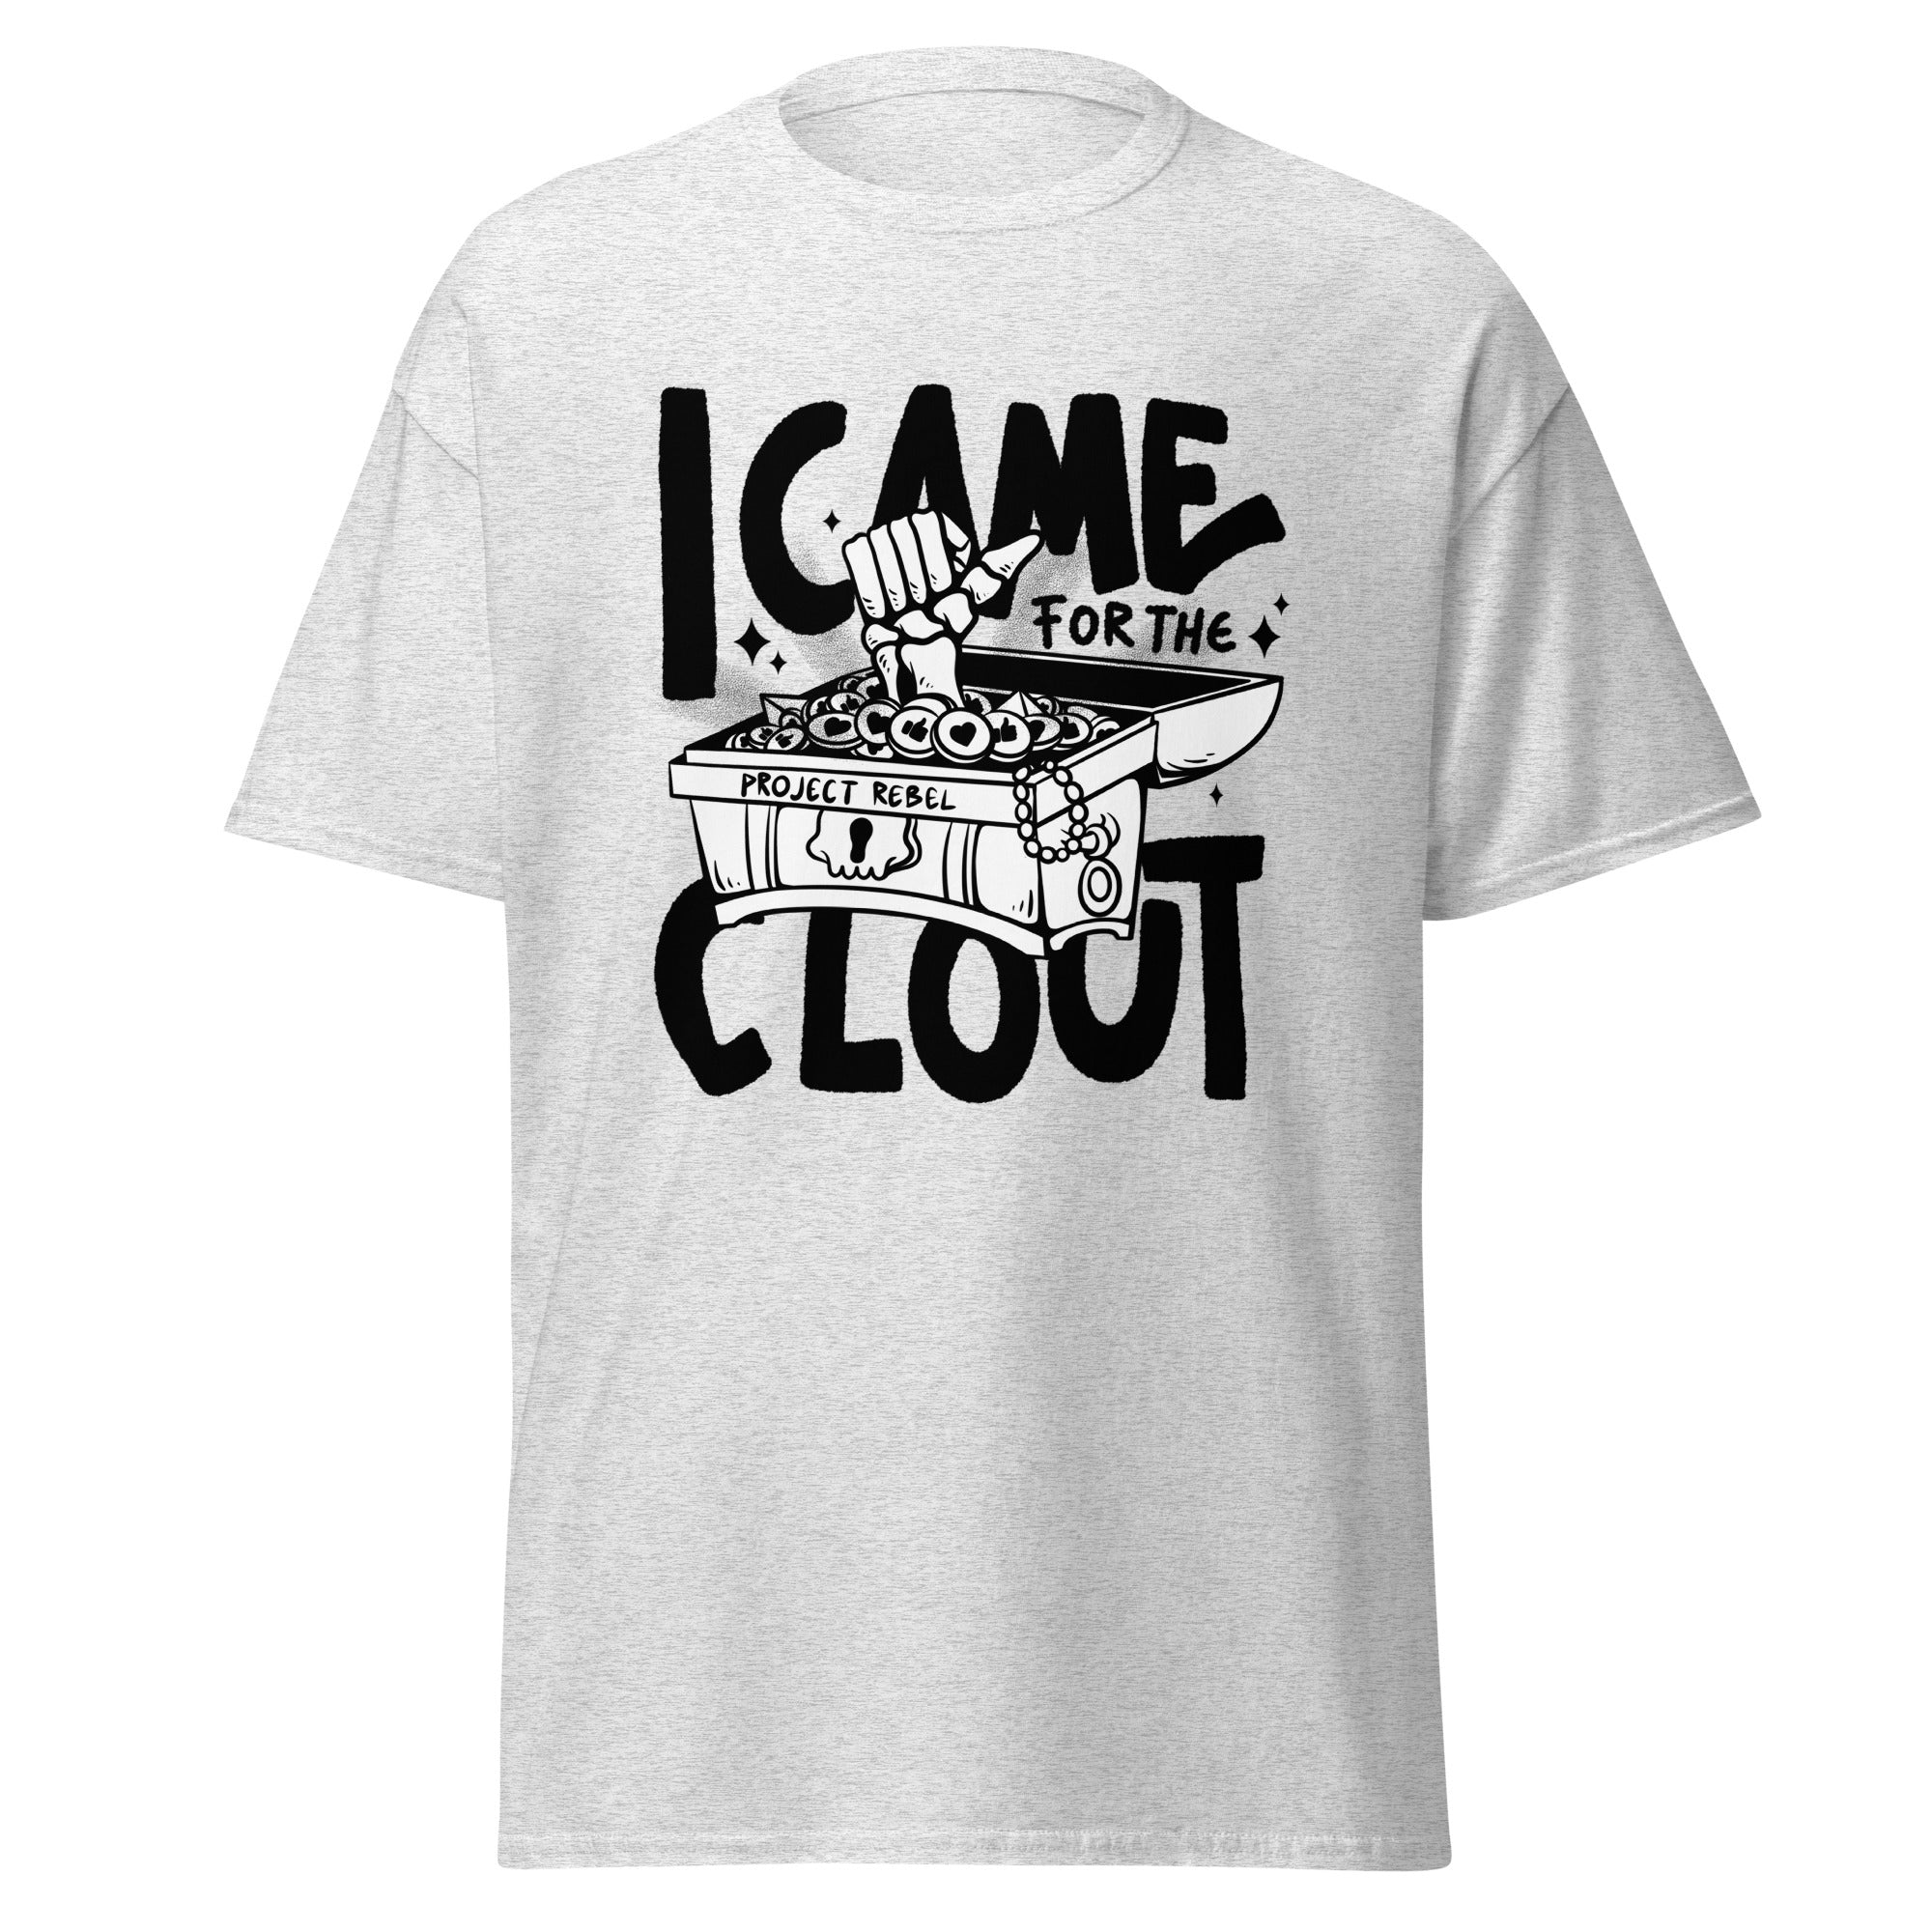 For the Clout T-Shirt - ProjectRebelClothing